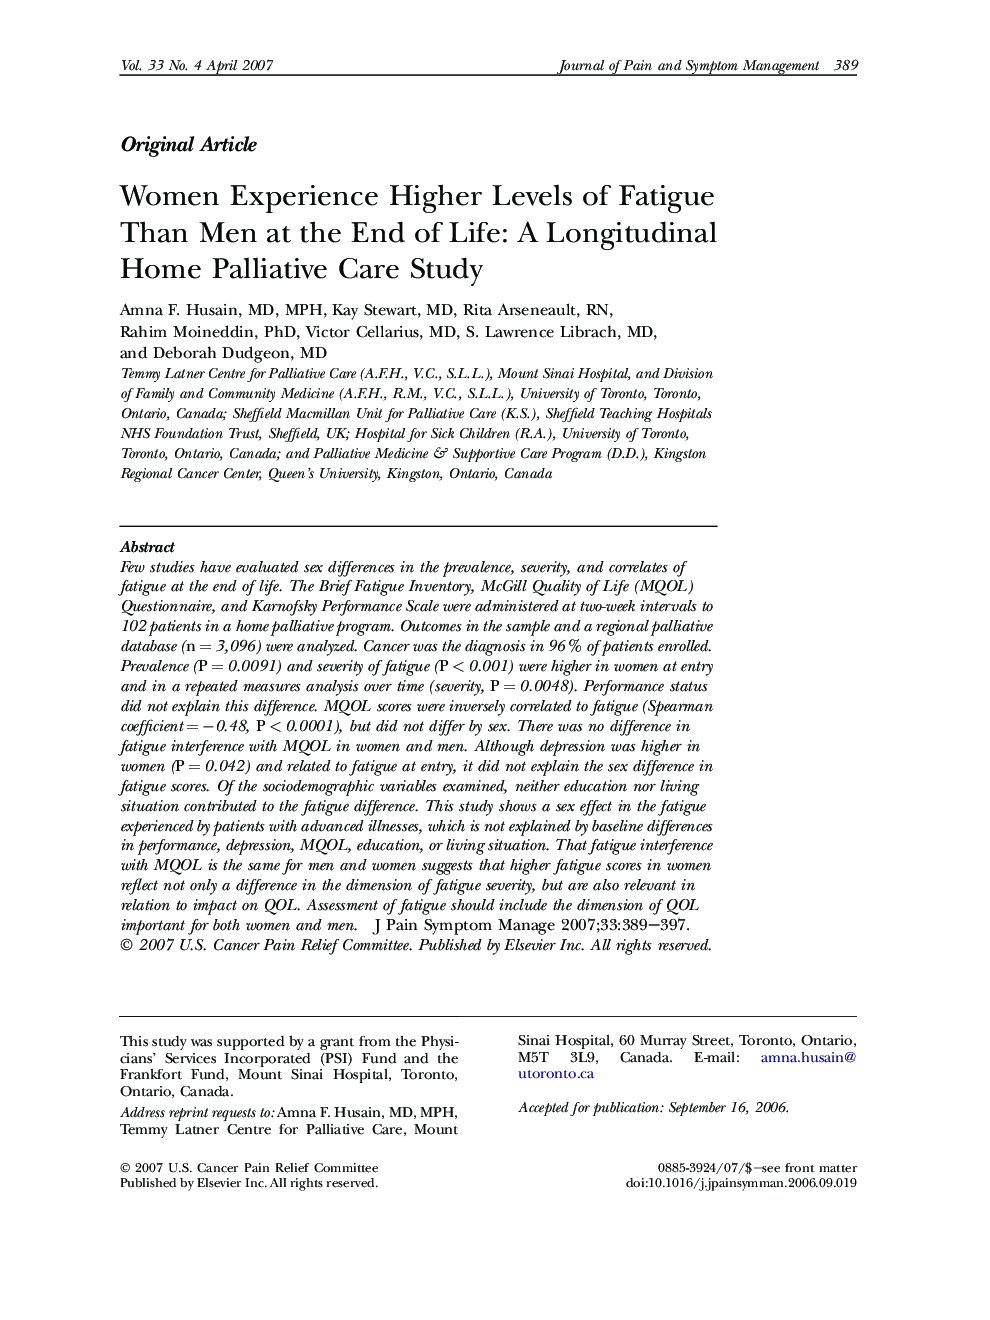 Women Experience Higher Levels of Fatigue Than Men at the End of Life: A Longitudinal Home Palliative Care Study 